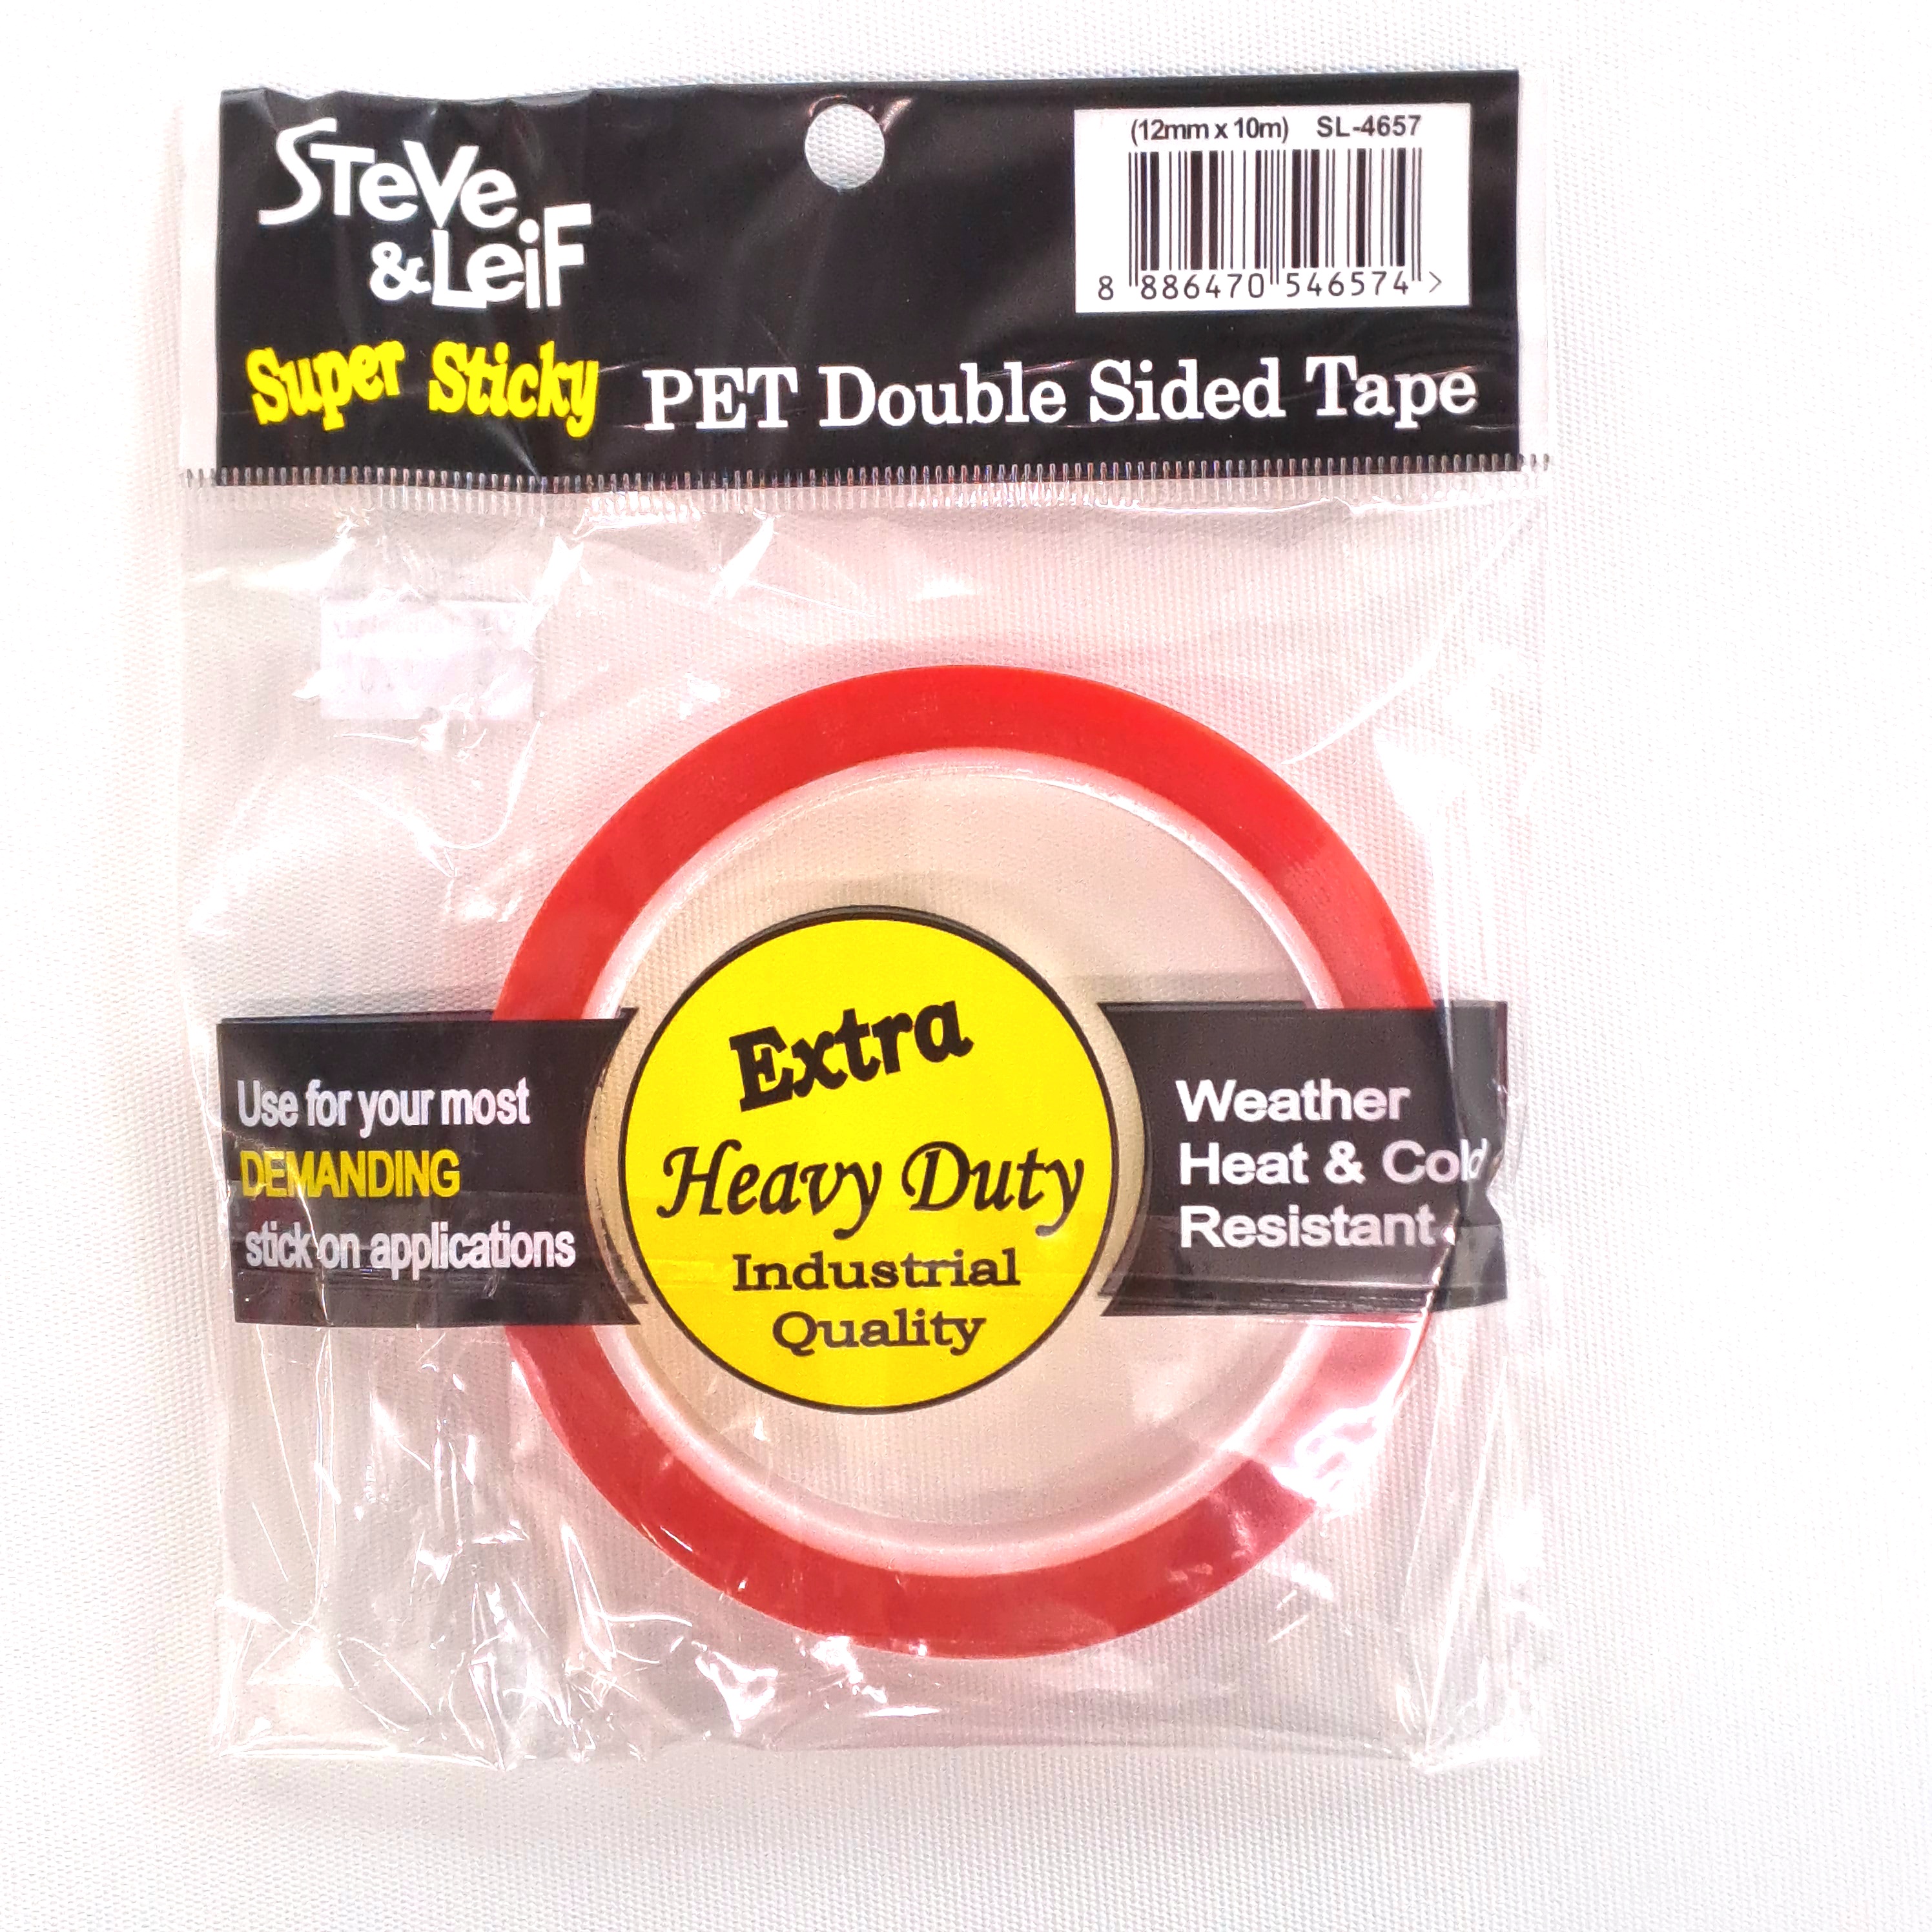 S&L 12mm x 10m Pet Double Sided Tape